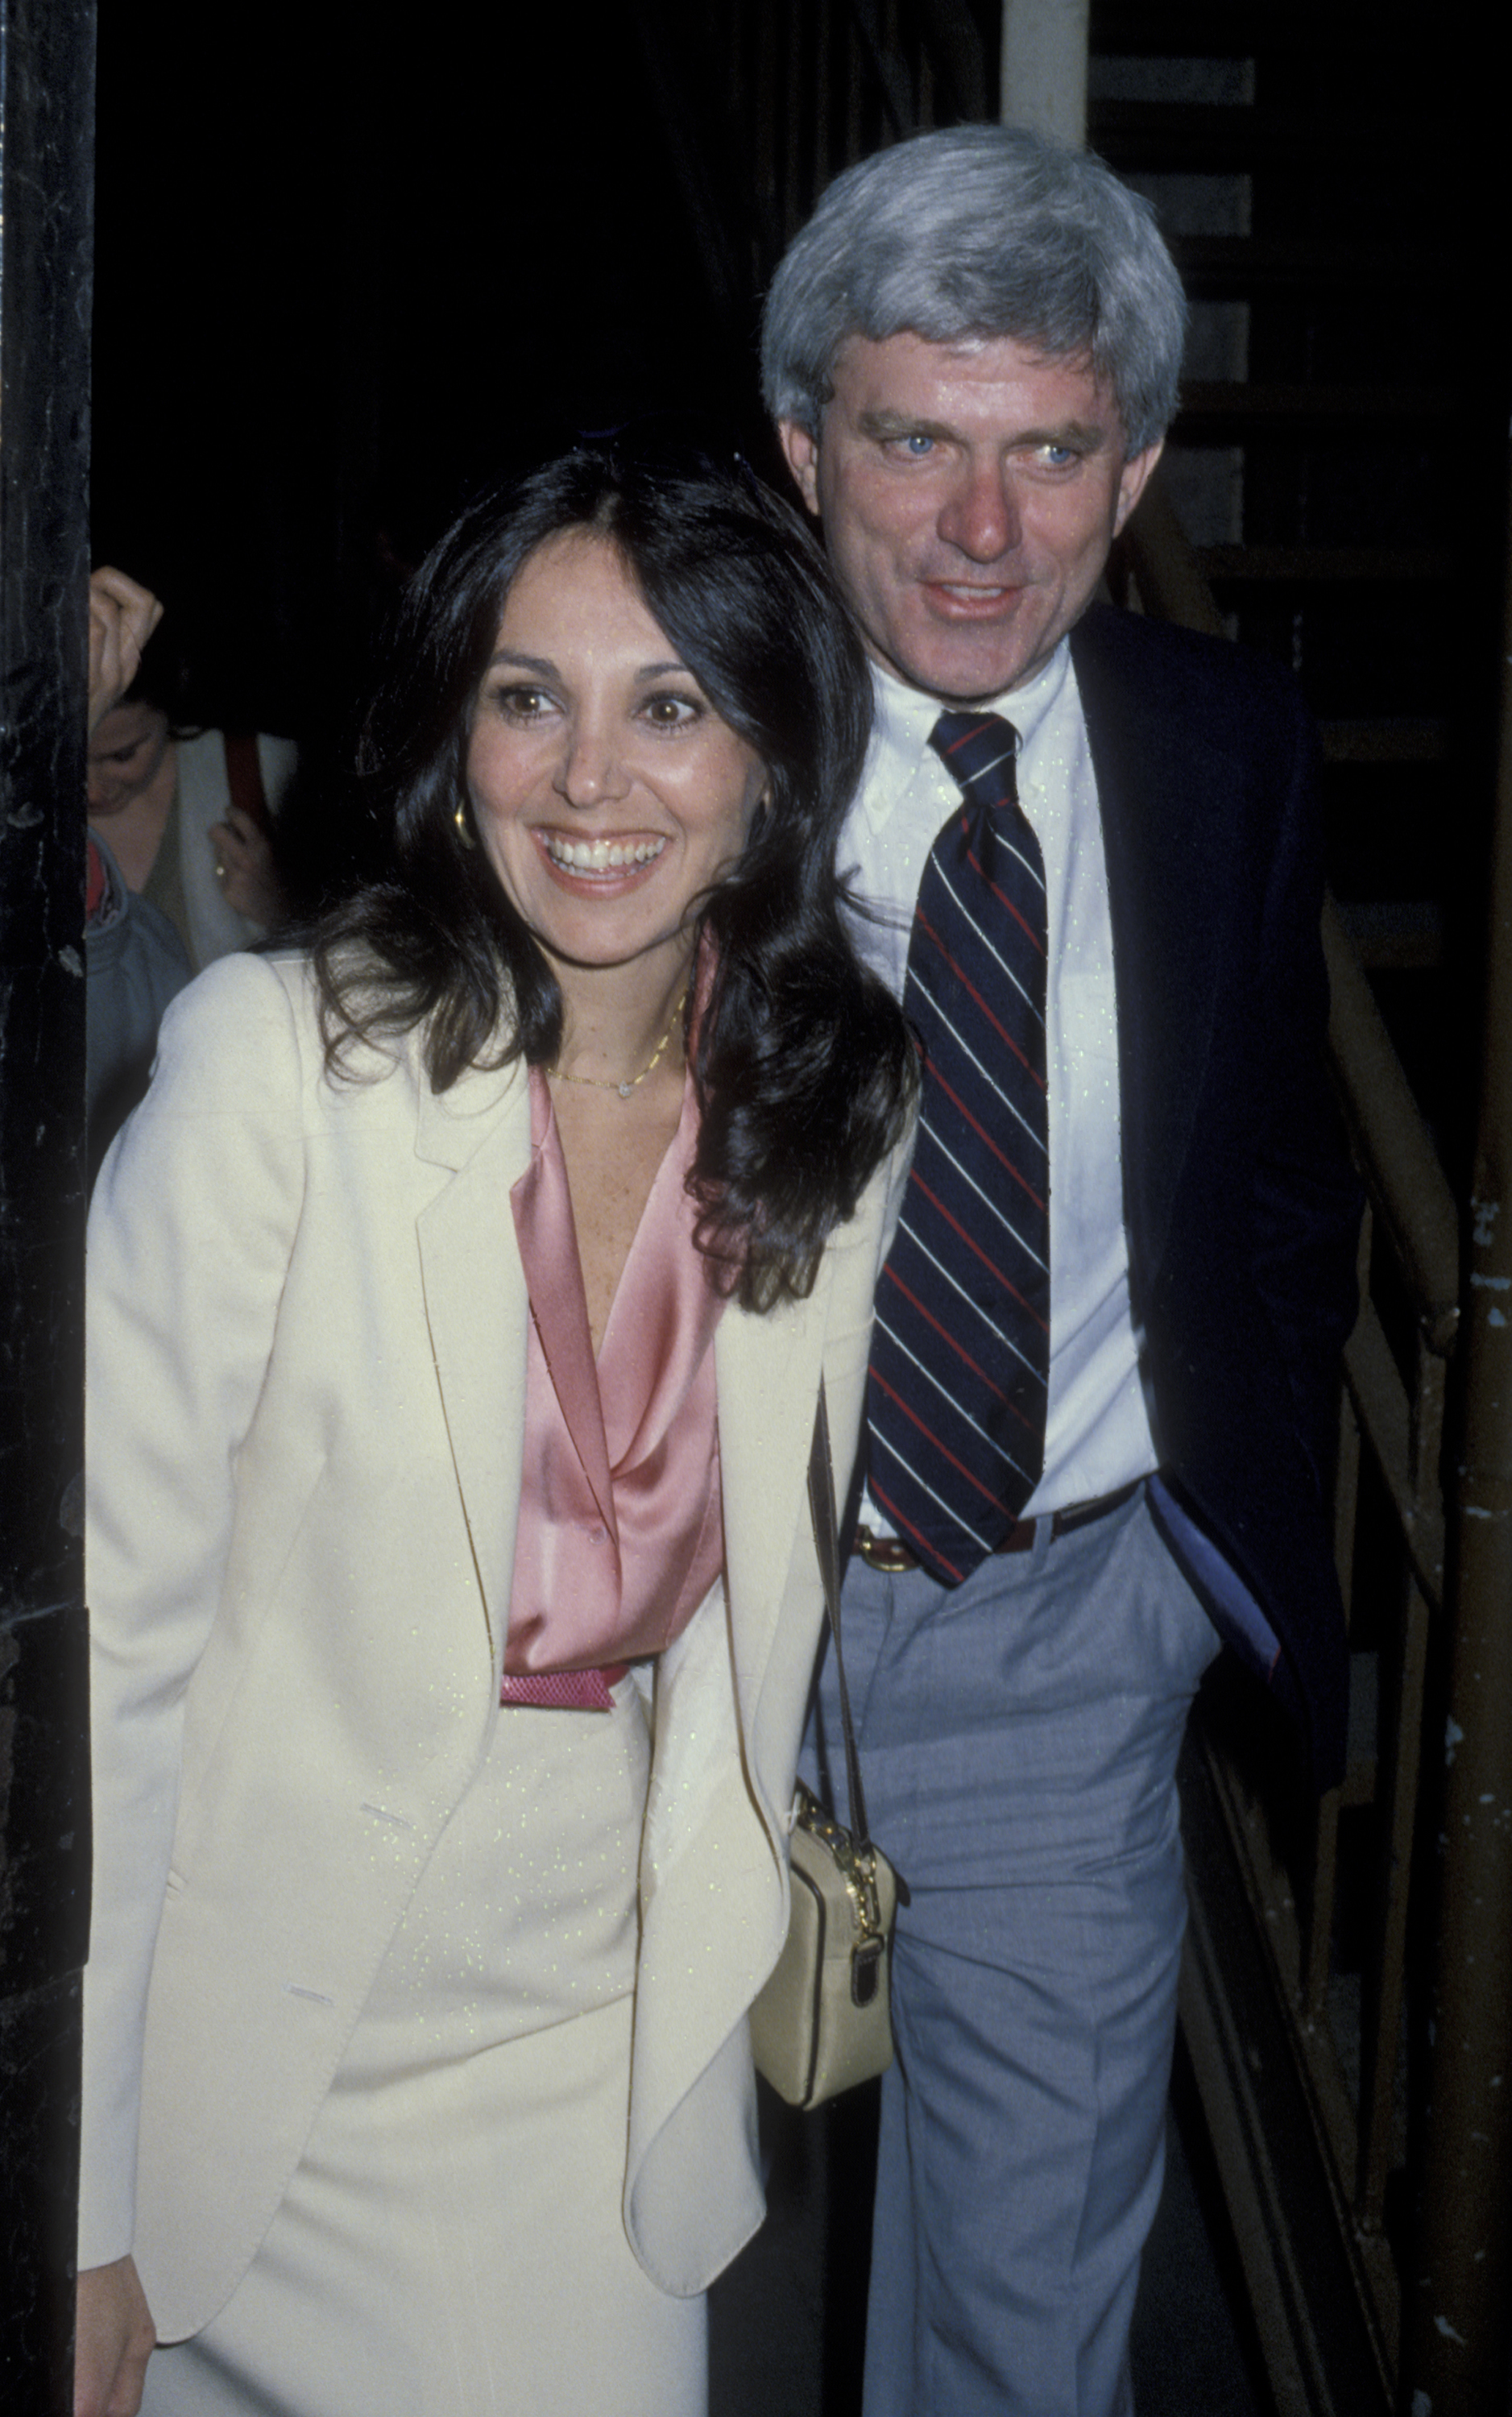 Marlo Thomas and Phil Donahue at the opening night of "The Goodbye People" in New York City, 1979 | Source: Getty Images